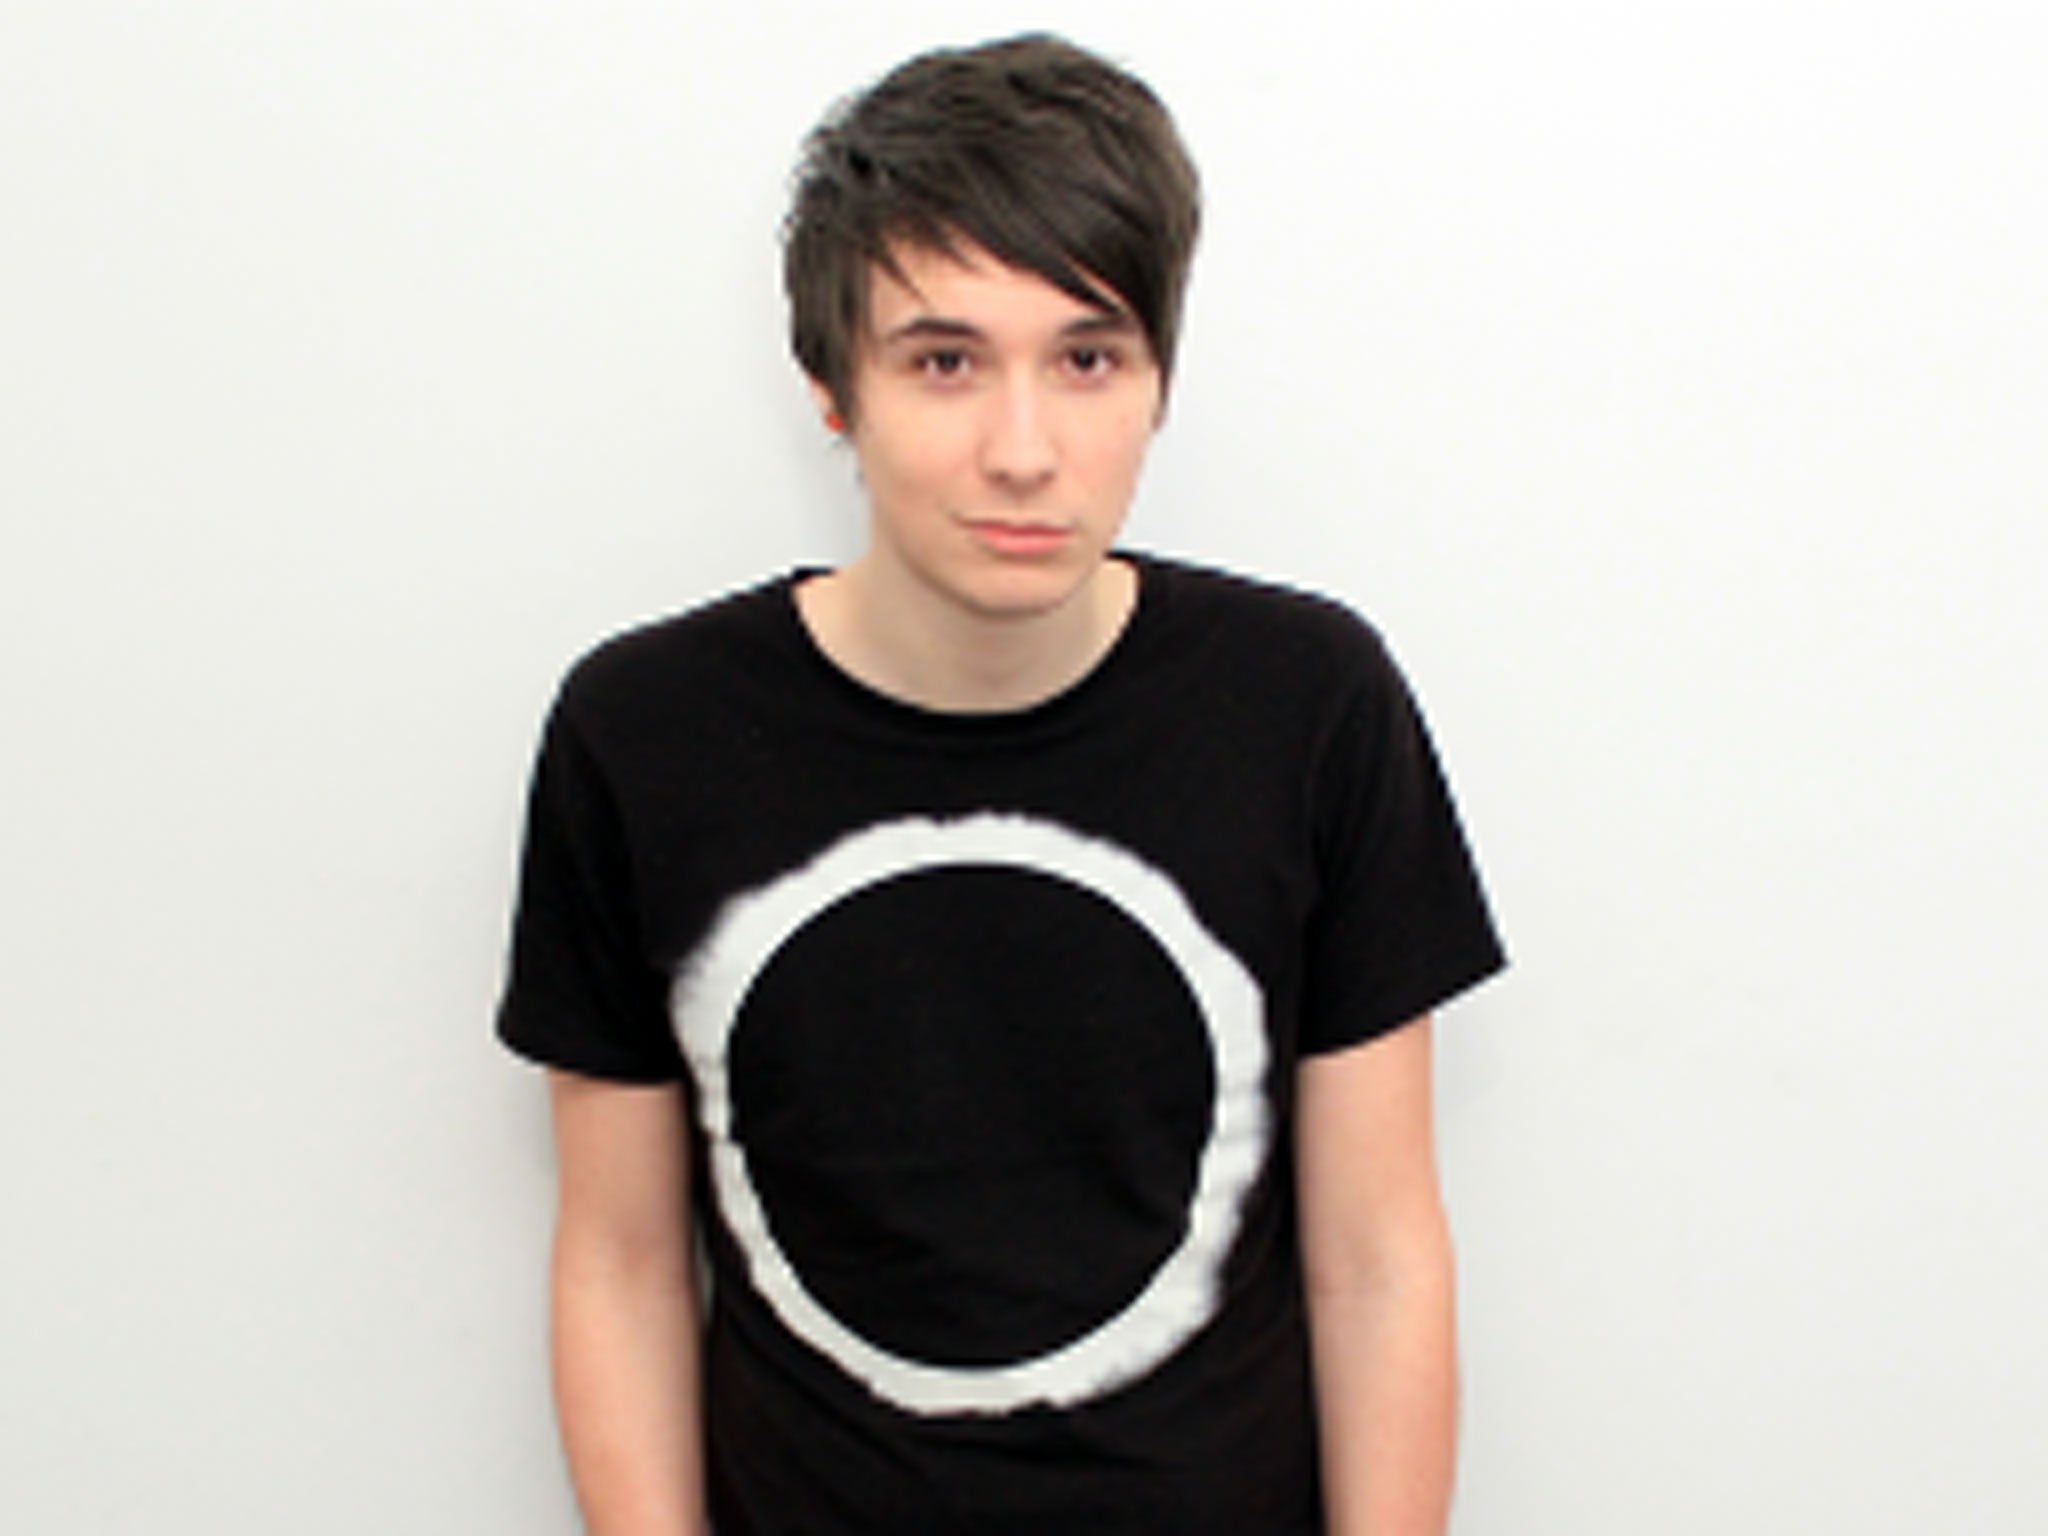 Dan Howell, who has 2.4m subscribers to his Dan is Not on Fire YouTube channel, will be hosting in BBC Radio 1 with Phil Lester